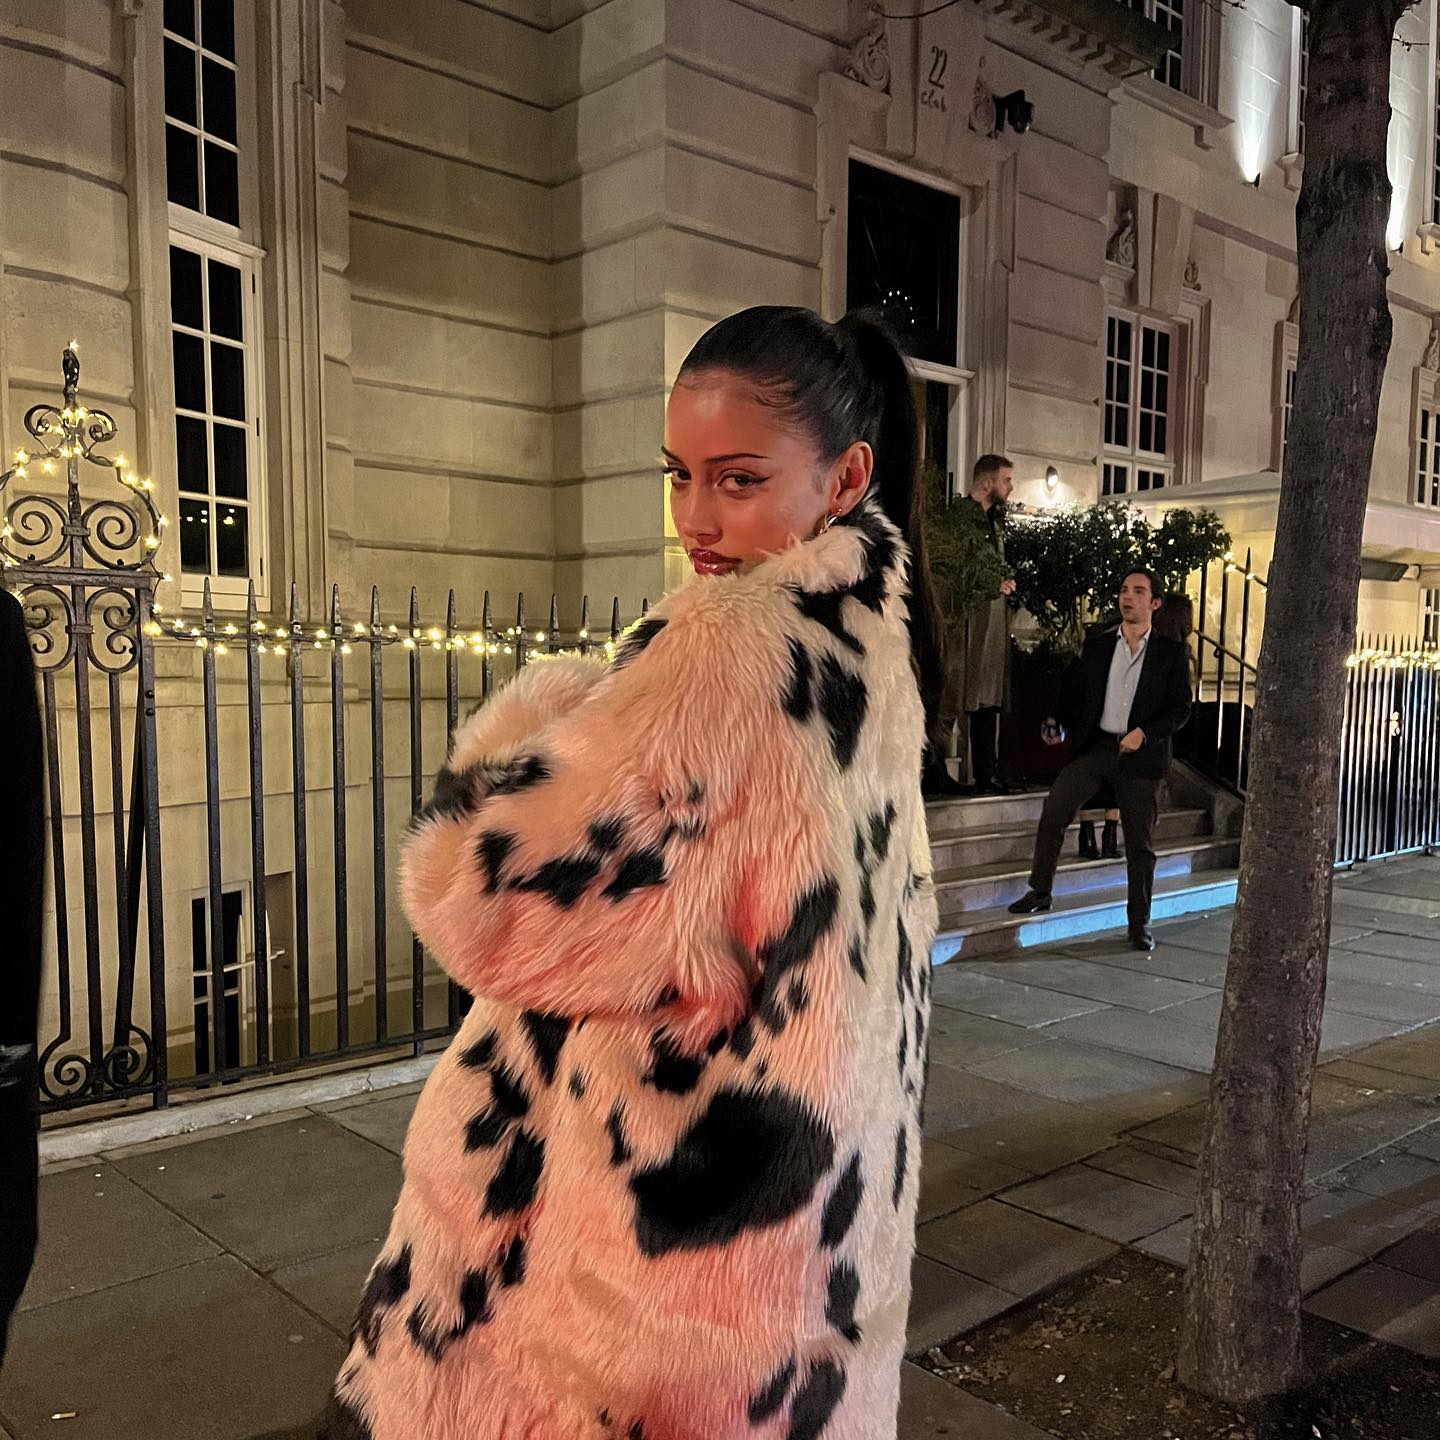 She was labelled a 'queen' while wearing a stunning Cruella Deville outfit